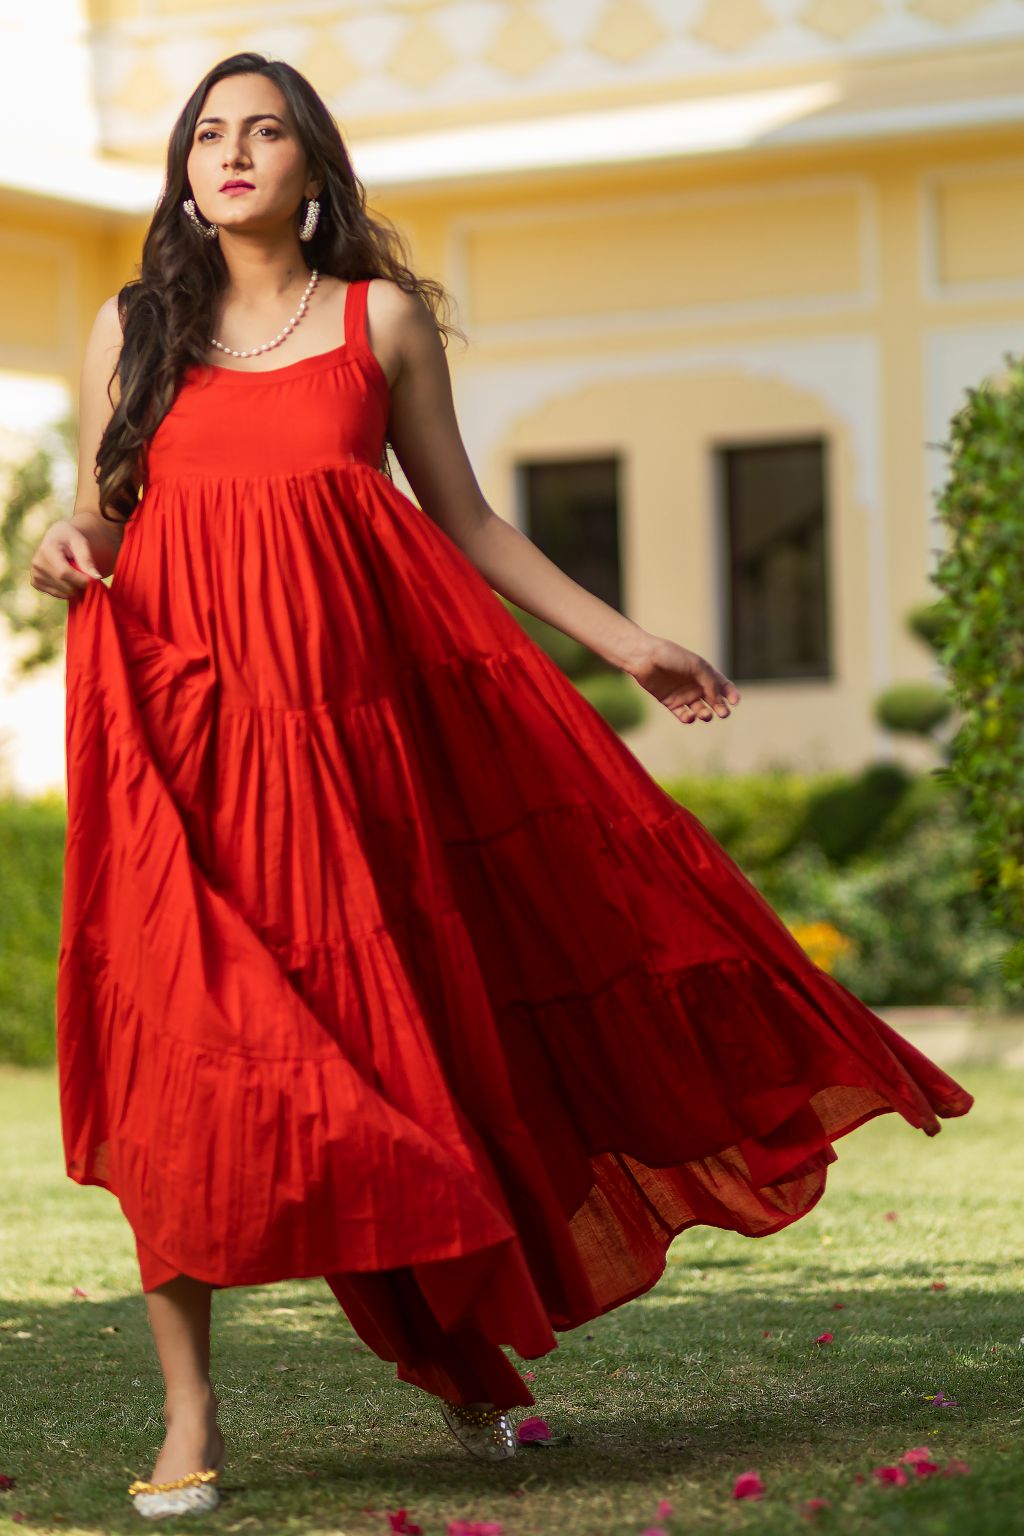 Cherry Red||Valentine | Dress clothes for women, Formal dress patterns,  Simple dresses